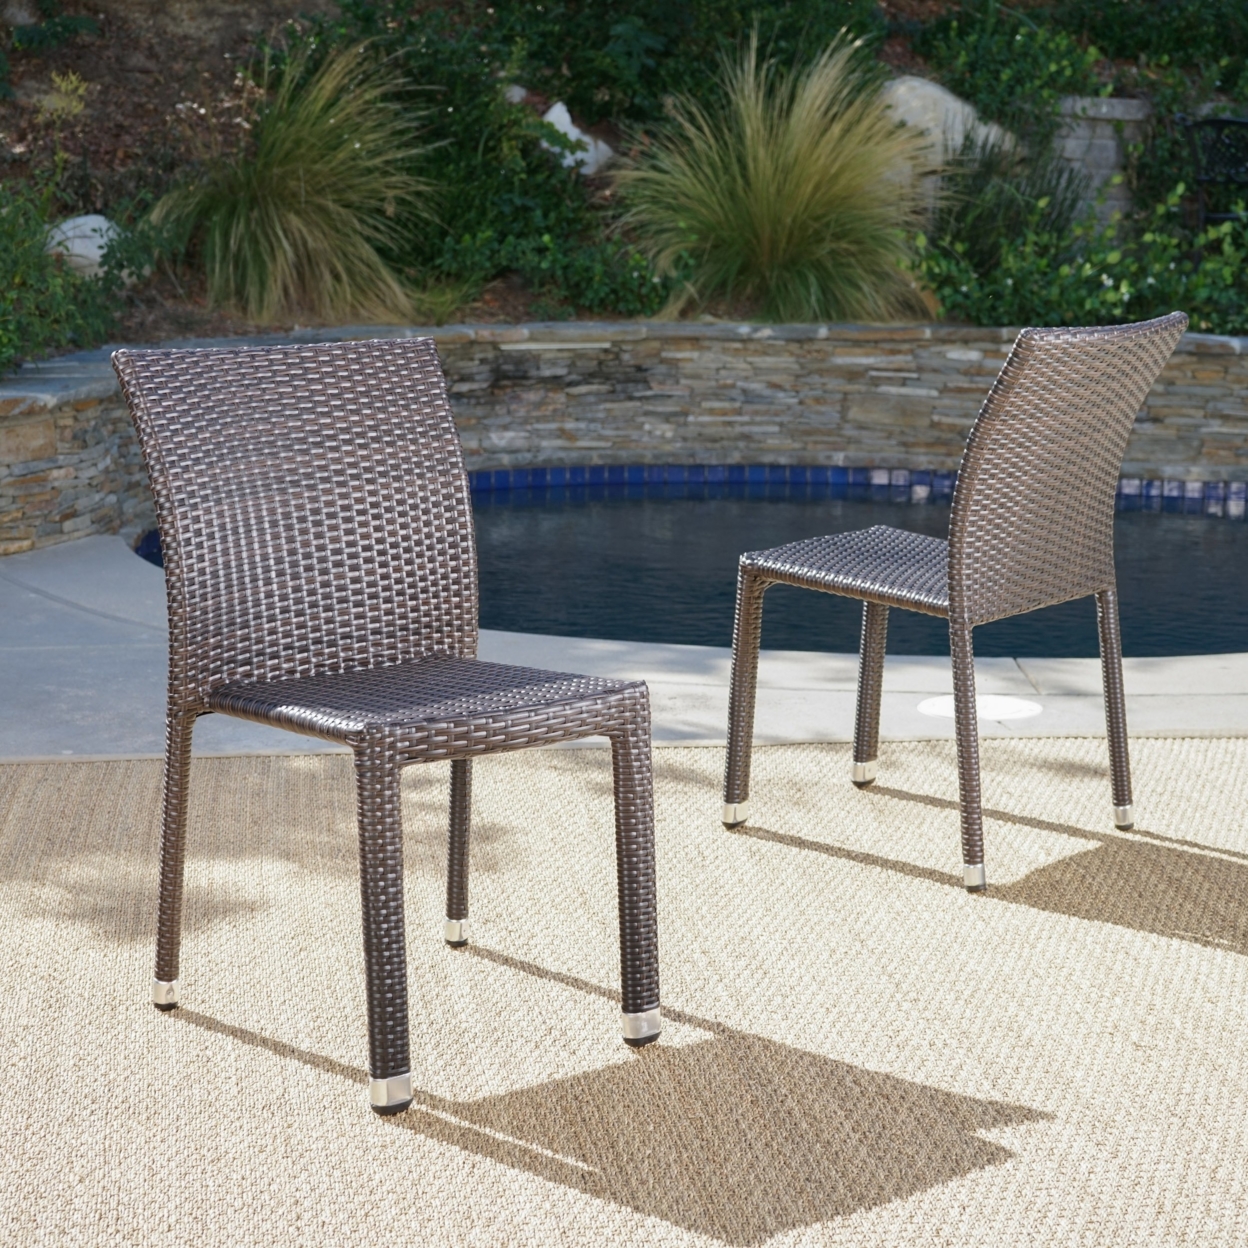 Dorside Outdoor Wicker Armless Stack Chairs With Aluminum Frame - Chateau Gray, Set Of 2